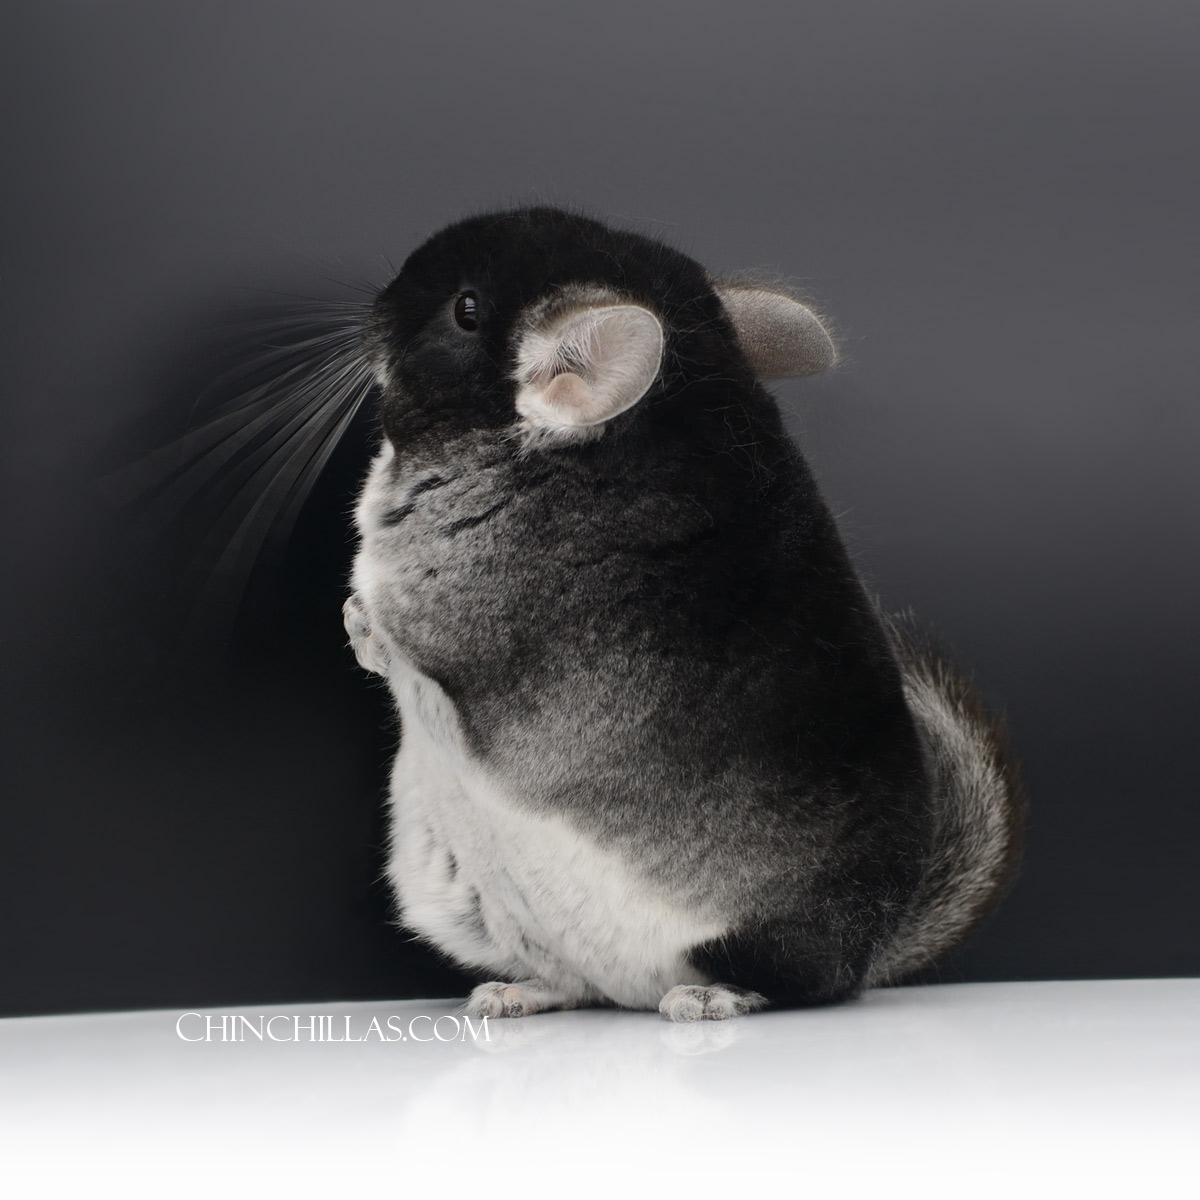 The simple beauty of the Gunning Black Velvet chinchilla is perhaps unsurpassed